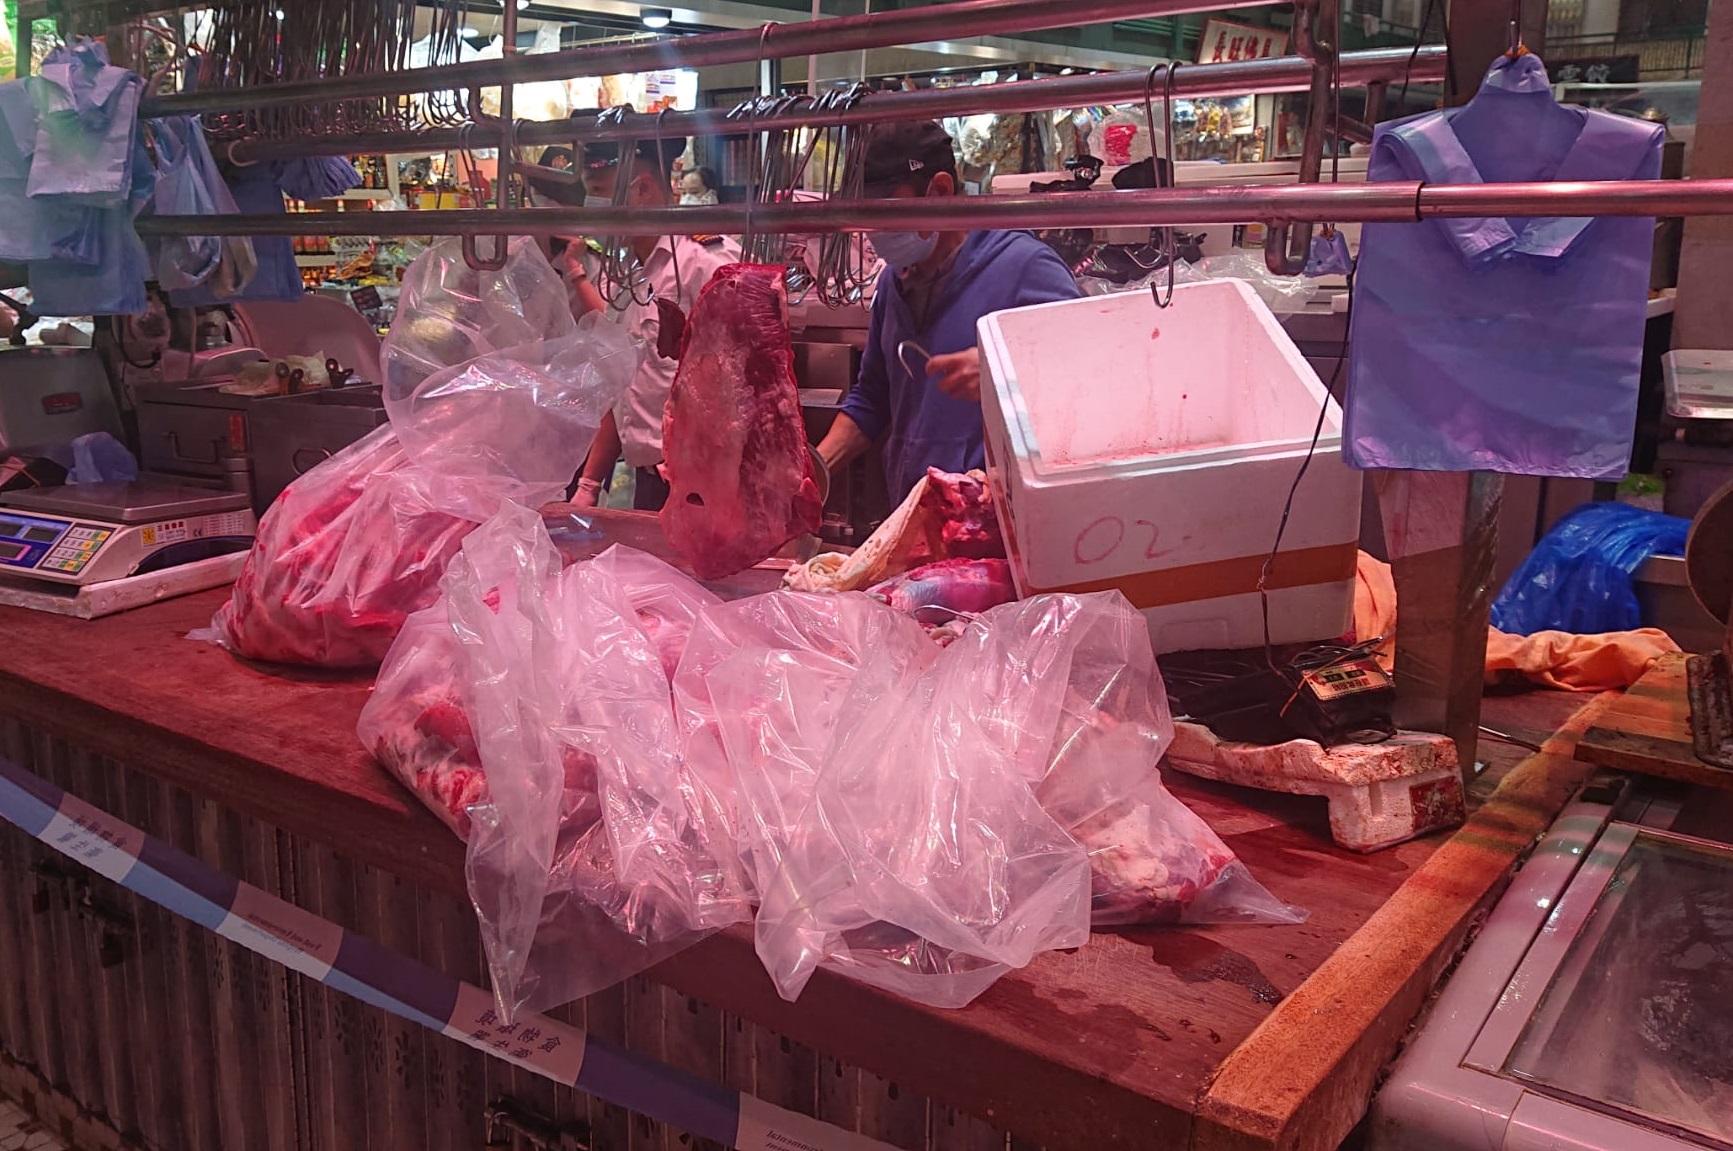 The Food and Environmental Hygiene Department (FEHD) in a blitz operation today (September 30) raided a licensed fresh provision shop in Shek Lei Shopping Centre, Kwai Chung, suspected of selling frozen meat as fresh meat. Photo shows the meat seized by FEHD officers during the operation.
